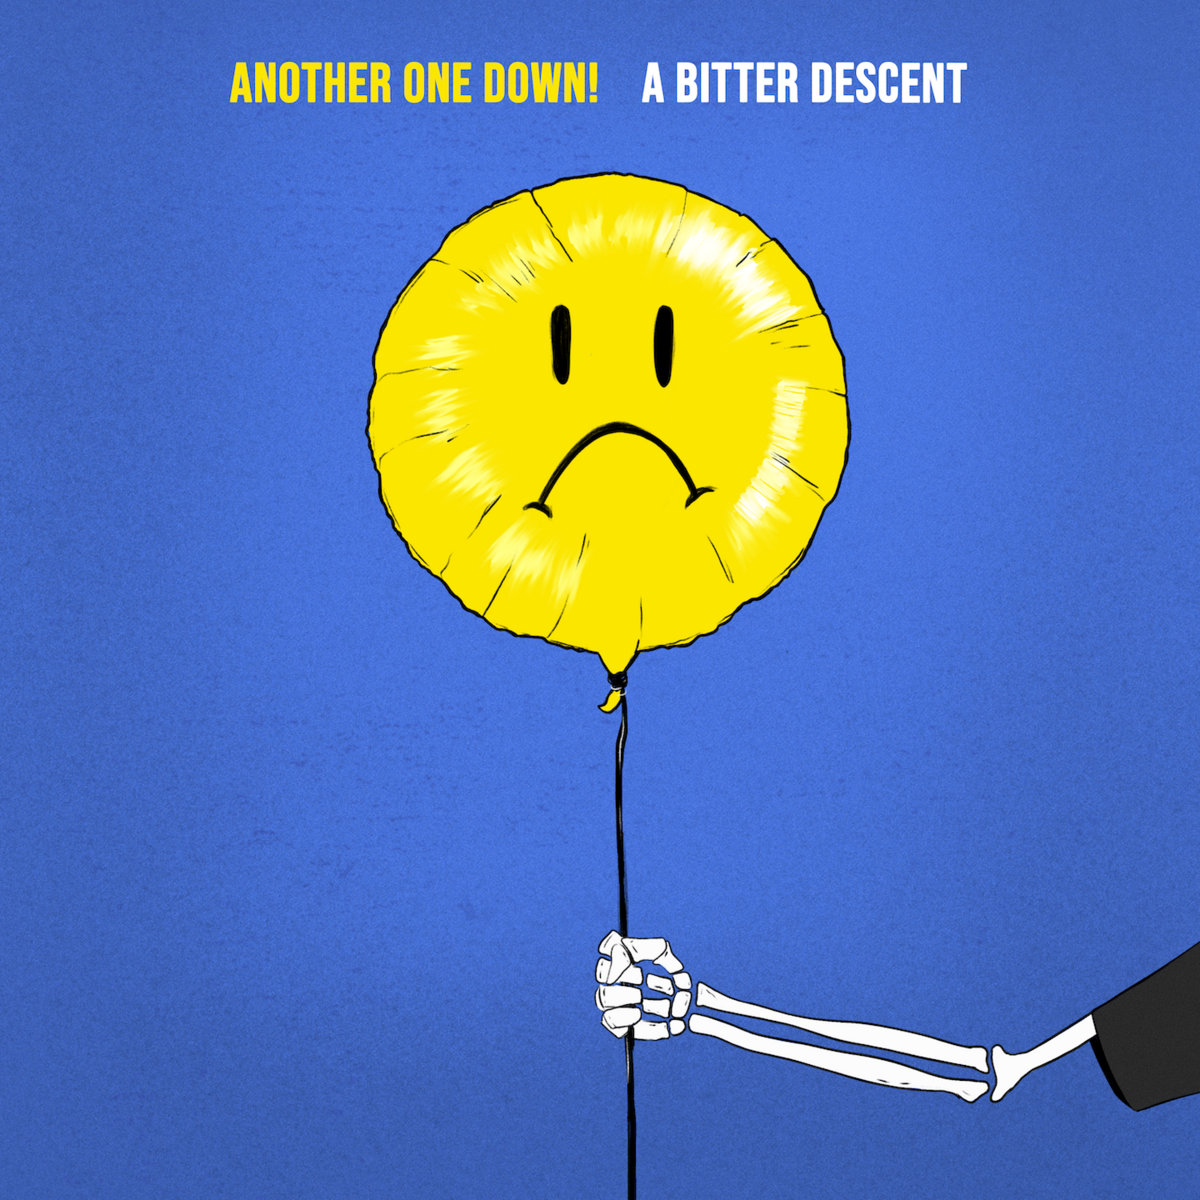 Circular yellow ballon against a solid blue background, depicting a large frowning face made up of black eyes and a black line frown; The balloon is being held by a skeleton arm, with the end of a t-shirt sleeve at the side of the frame. Yellow and white text at the top of the frame reads, "Another One Down! A Bitter Descent"